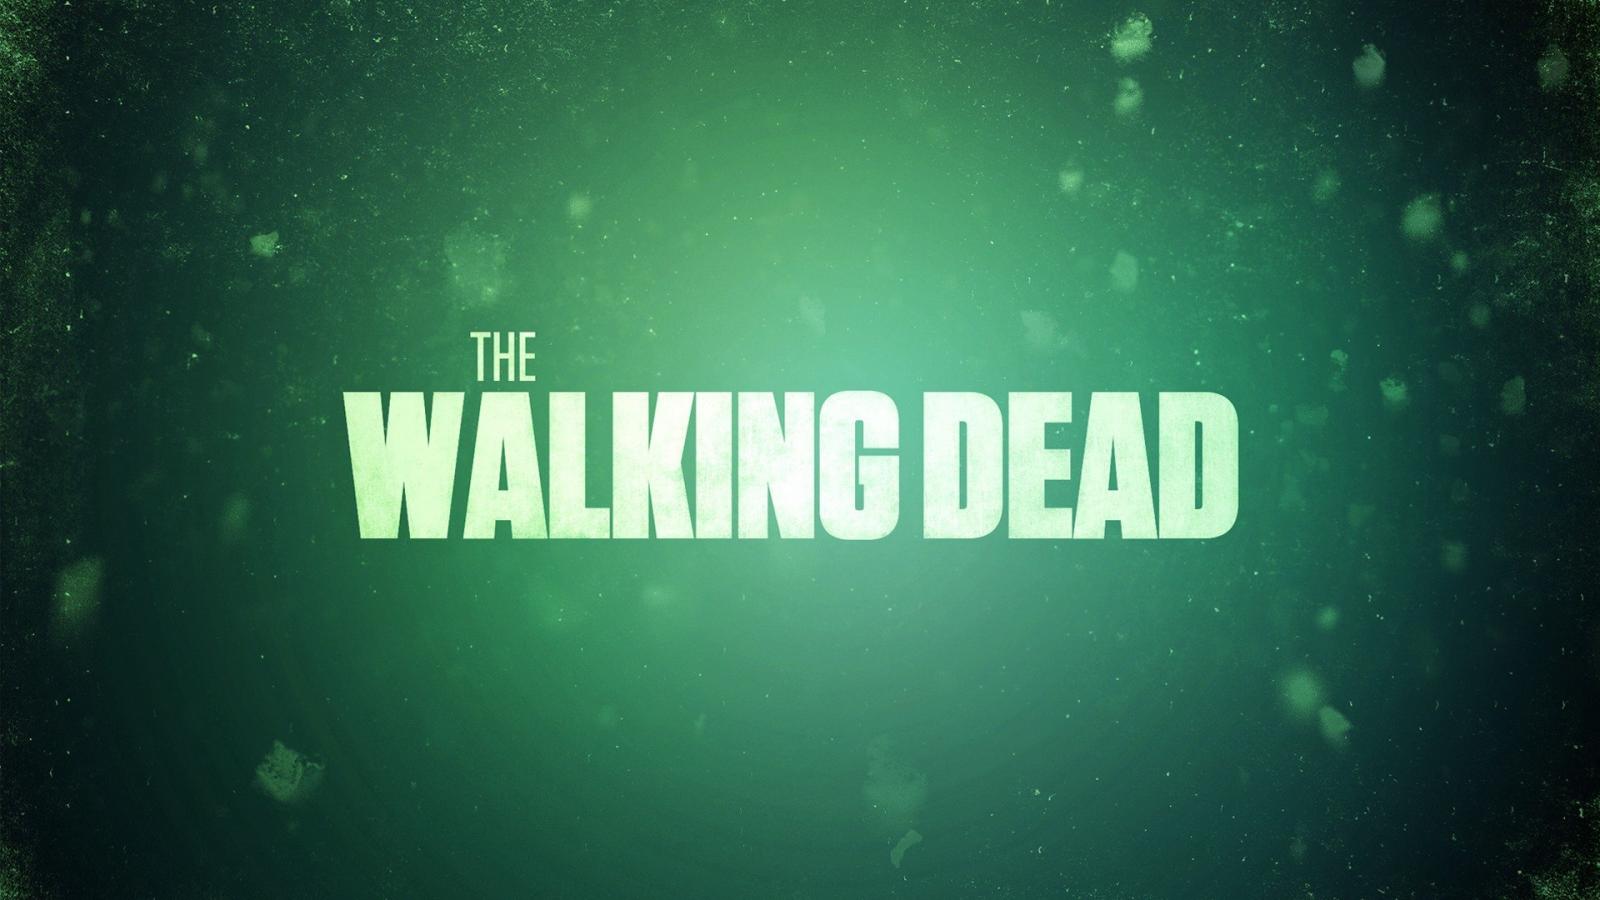 Amc the walking dead wallpapers photos pictures HQ WALLPAPER   31833